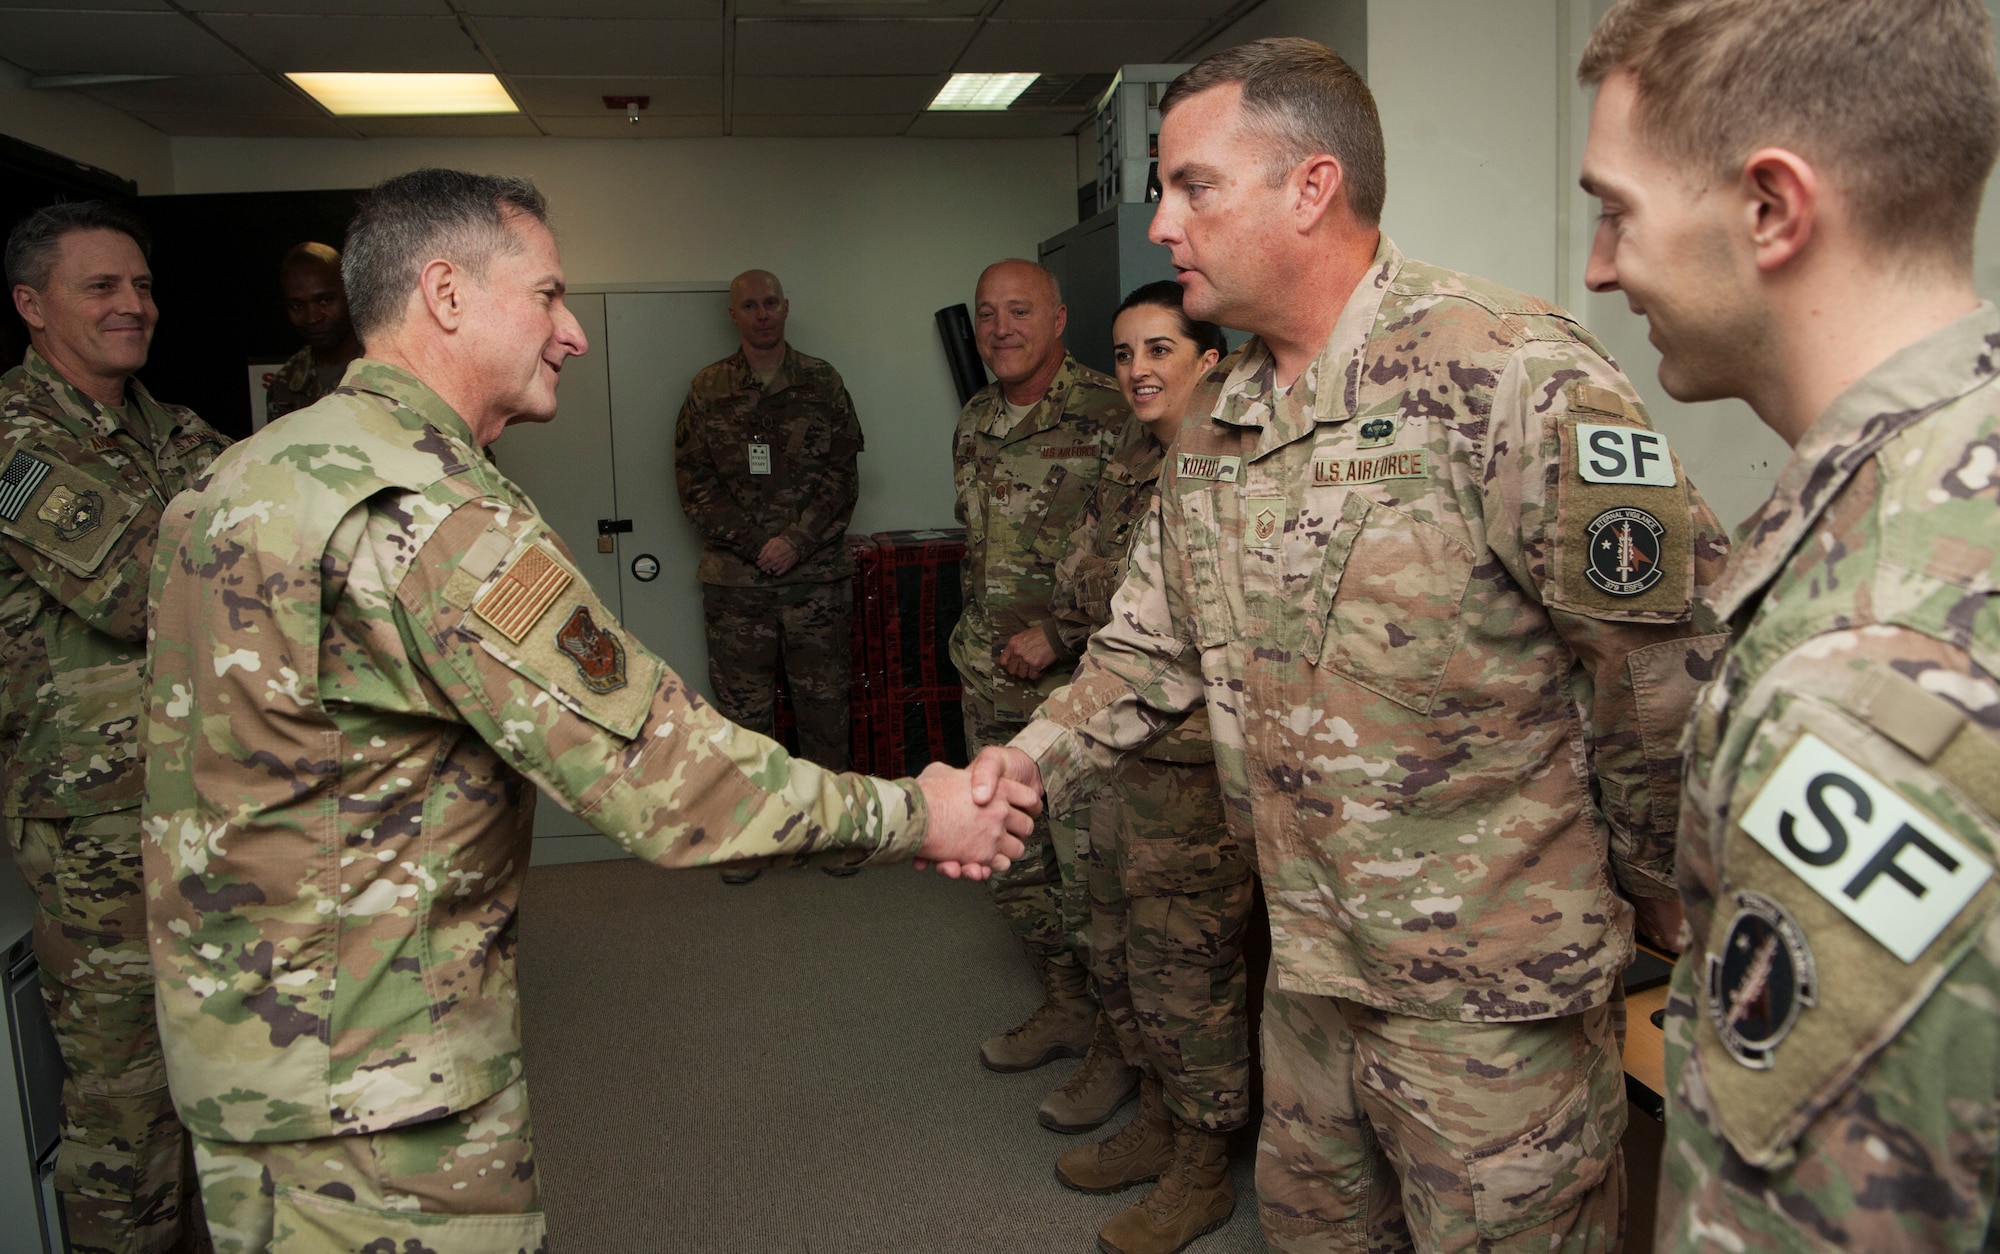 U.S. Air Force Chief of Staff Gen. David L. Goldfein coins Master Sgt. Christopher Kohut, 379th Expeditionary Security Forces Squadron, for exceptional performance prior to a base-wide “all call” at Al Udeid Air Base, Qatar, Dec. 19, 2018. Outstanding Airmen were selected to meet with Goldfein and were recognized for their contributing to the 379th Air Expeditionary Wing’s mission. During the all call, Goldfein and Chief Master Sgt. of the Air Force Kaleth O. Wright emphasized their gratitude for the safety and security provided by Airmen serving at Al Udeid while also encouraging Airmen to take ownership of their Air Force. (U.S. Air Force photo by Tech. Sgt. Christopher Hubenthal)